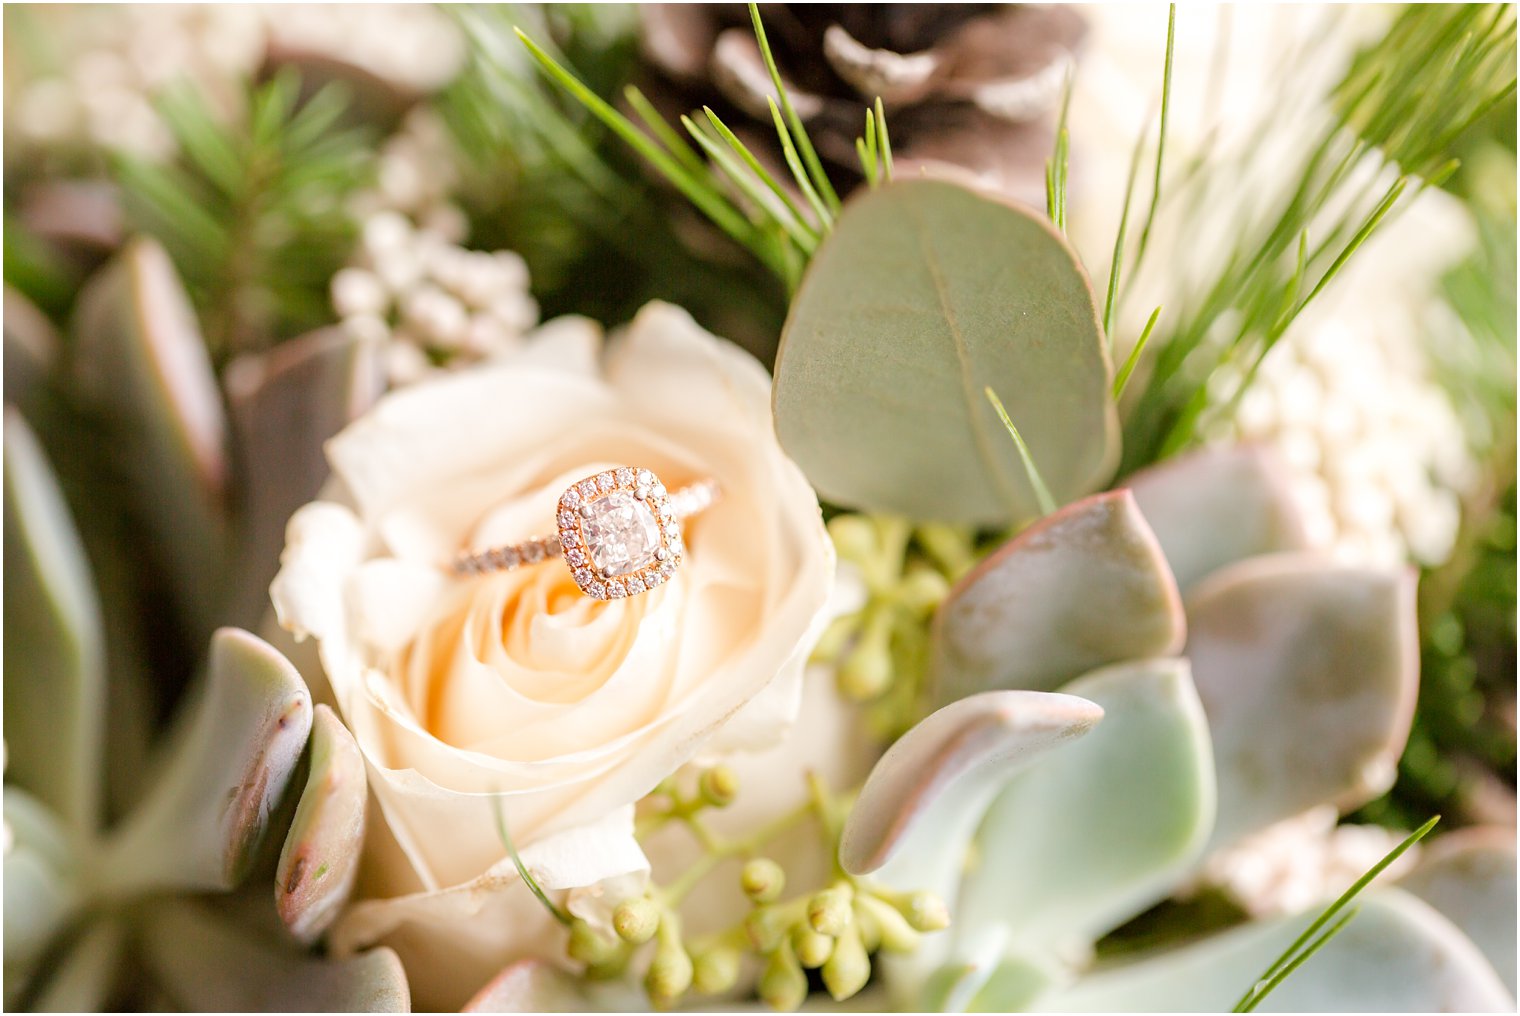 Engagement ring in bouquet with winter greenery